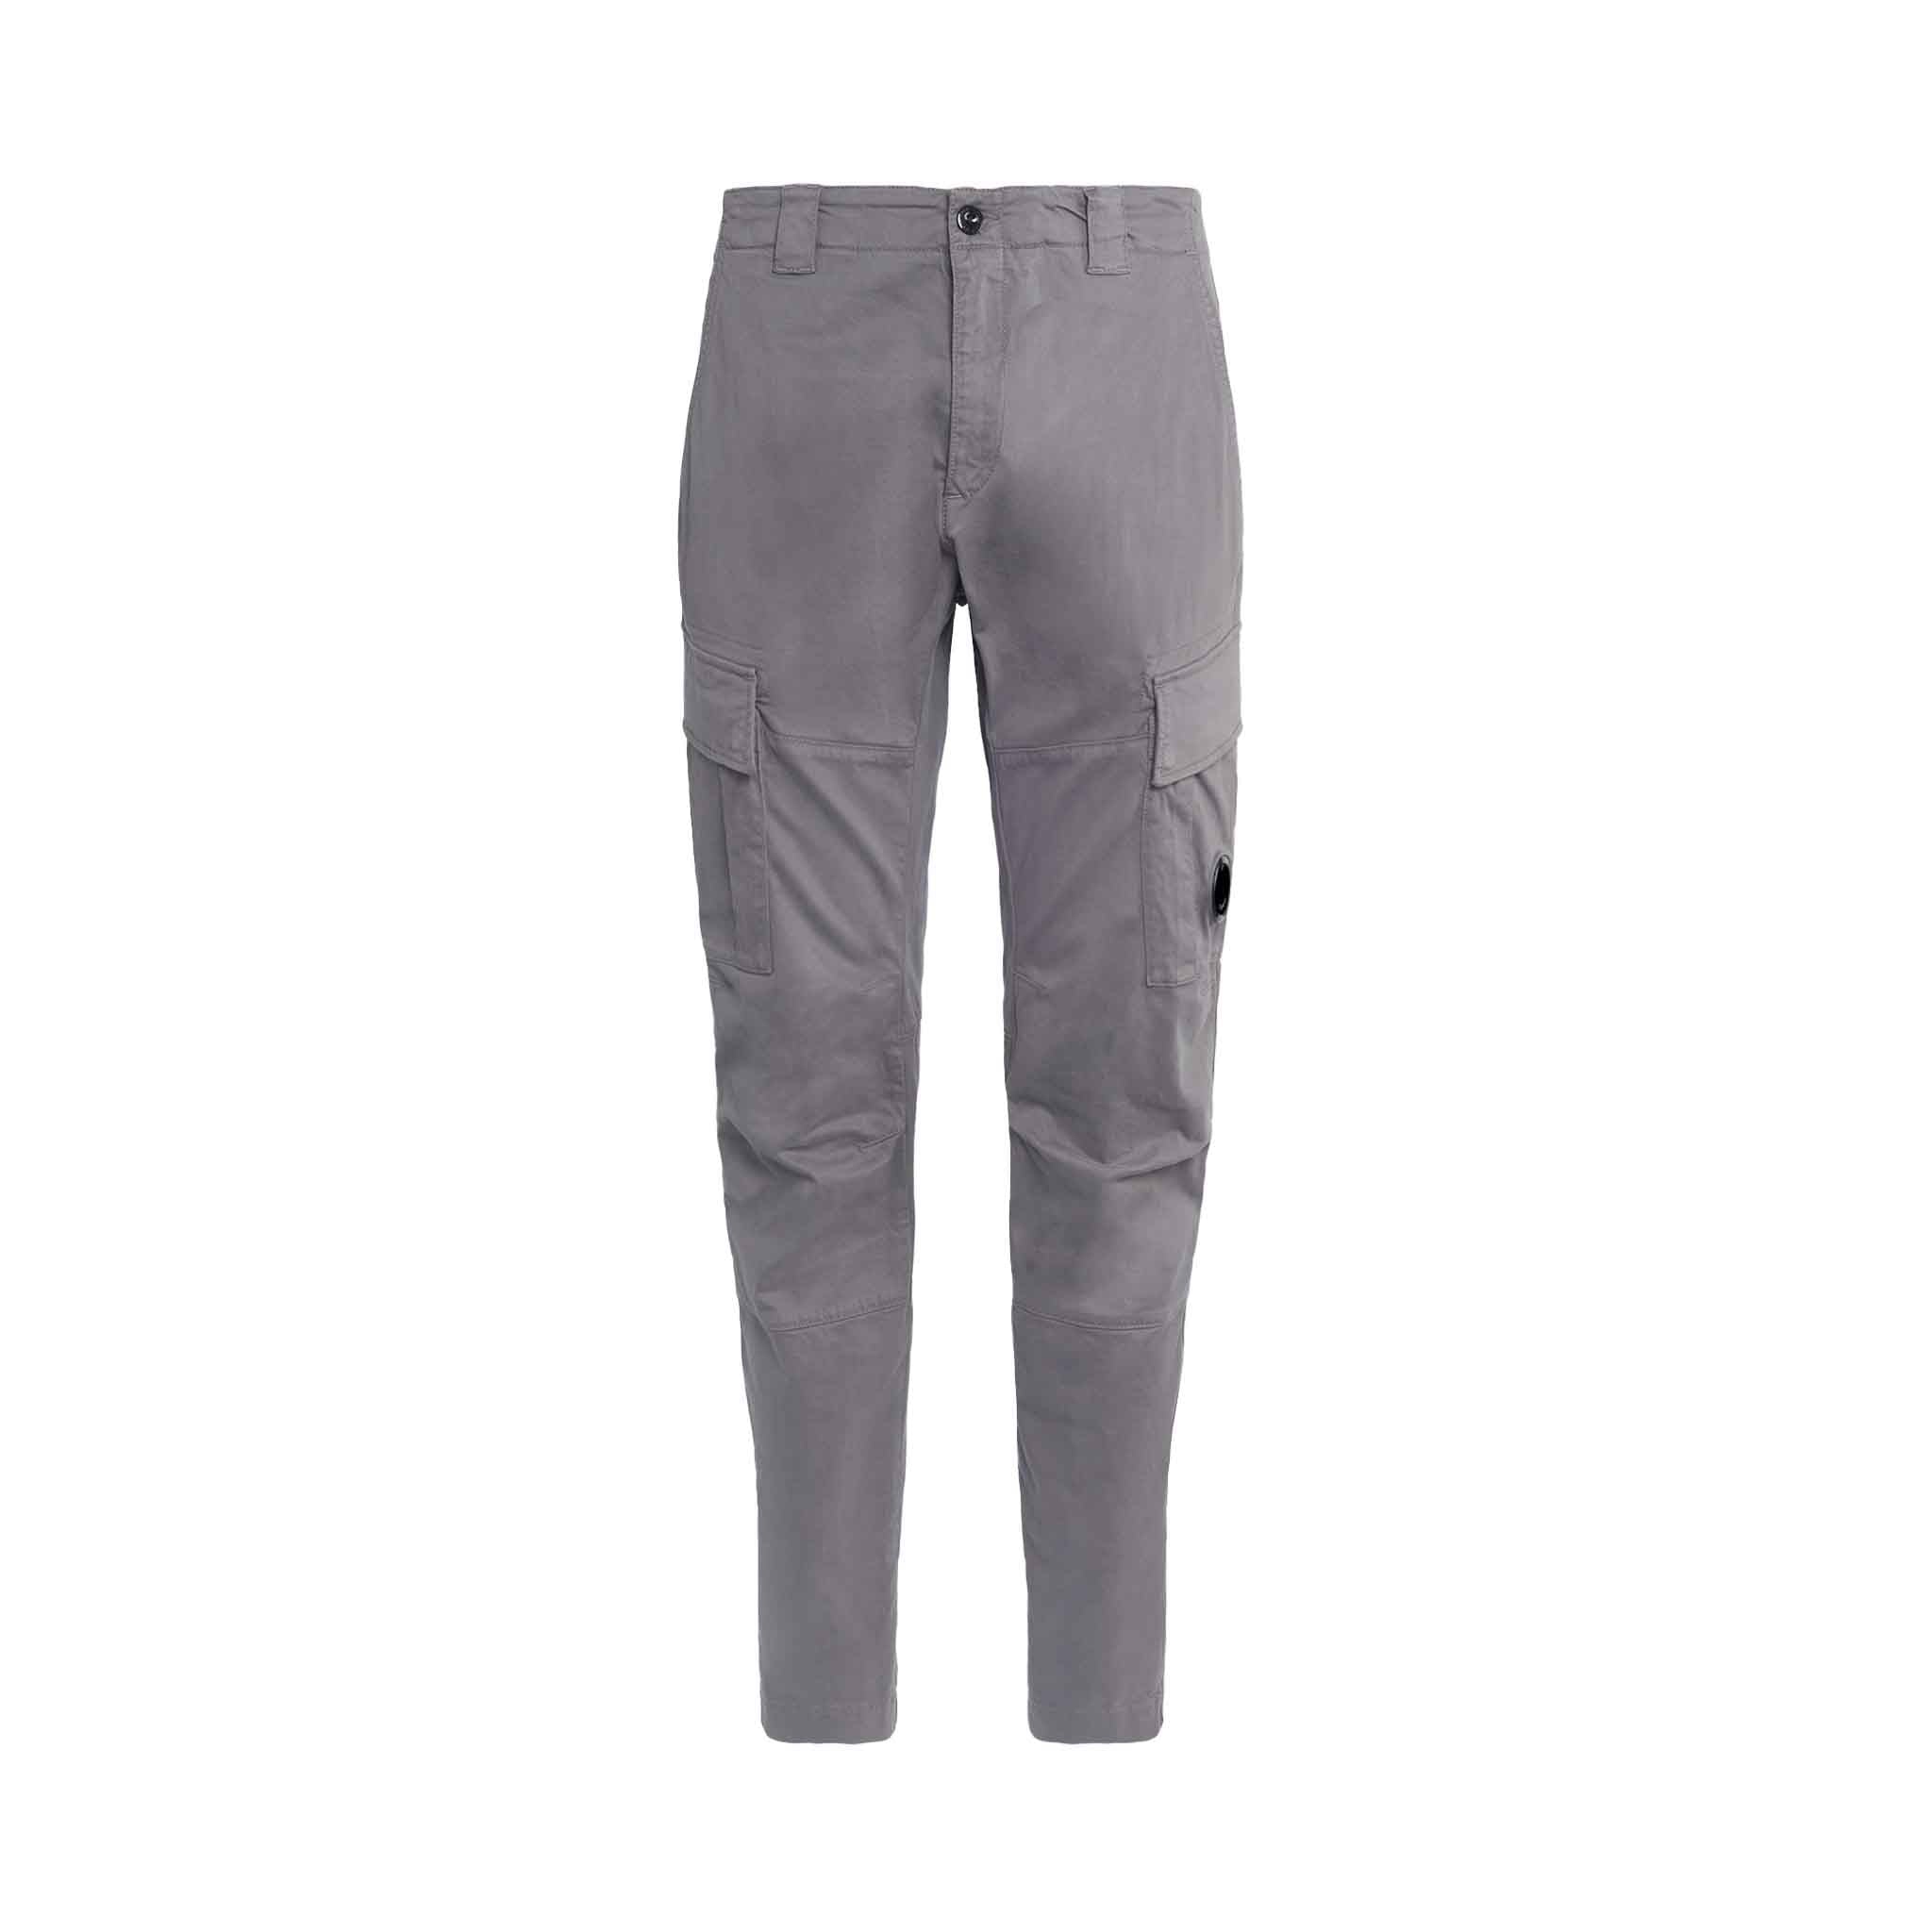 C.P. Company Stretch Sateen Ergonomic Lens Pants in Drizzle Grey